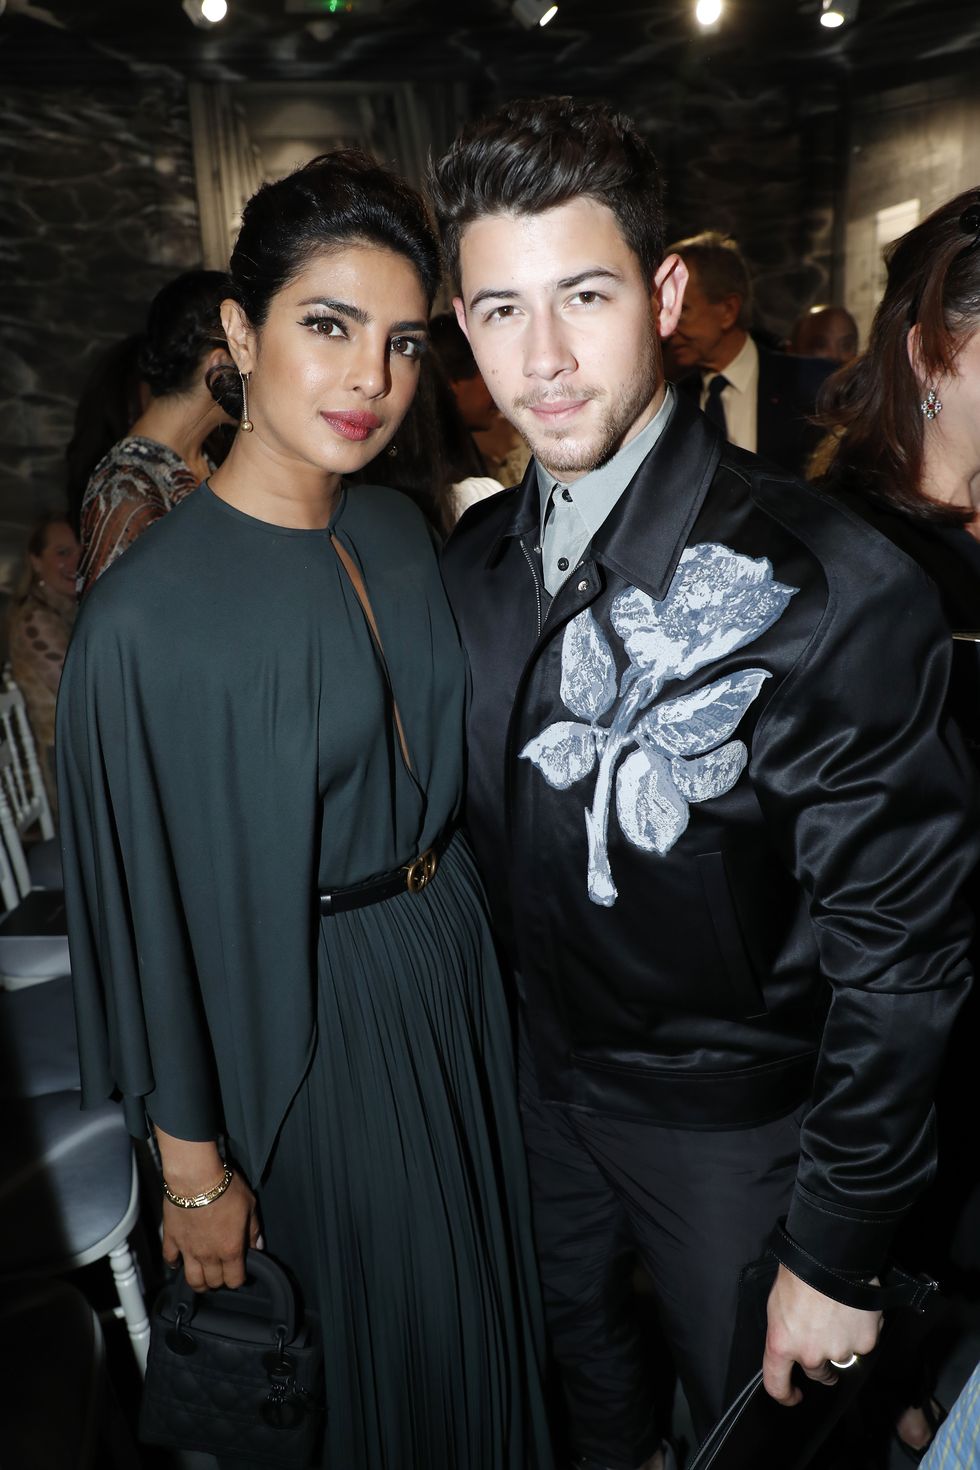 paris, france july 01 priyanka chopra and nick jonas attend the christian dior haute couture fallwinter 2019 2020 show as part of paris fashion week on july 01, 2019 in paris, france photo by rindoffcharriaugetty images